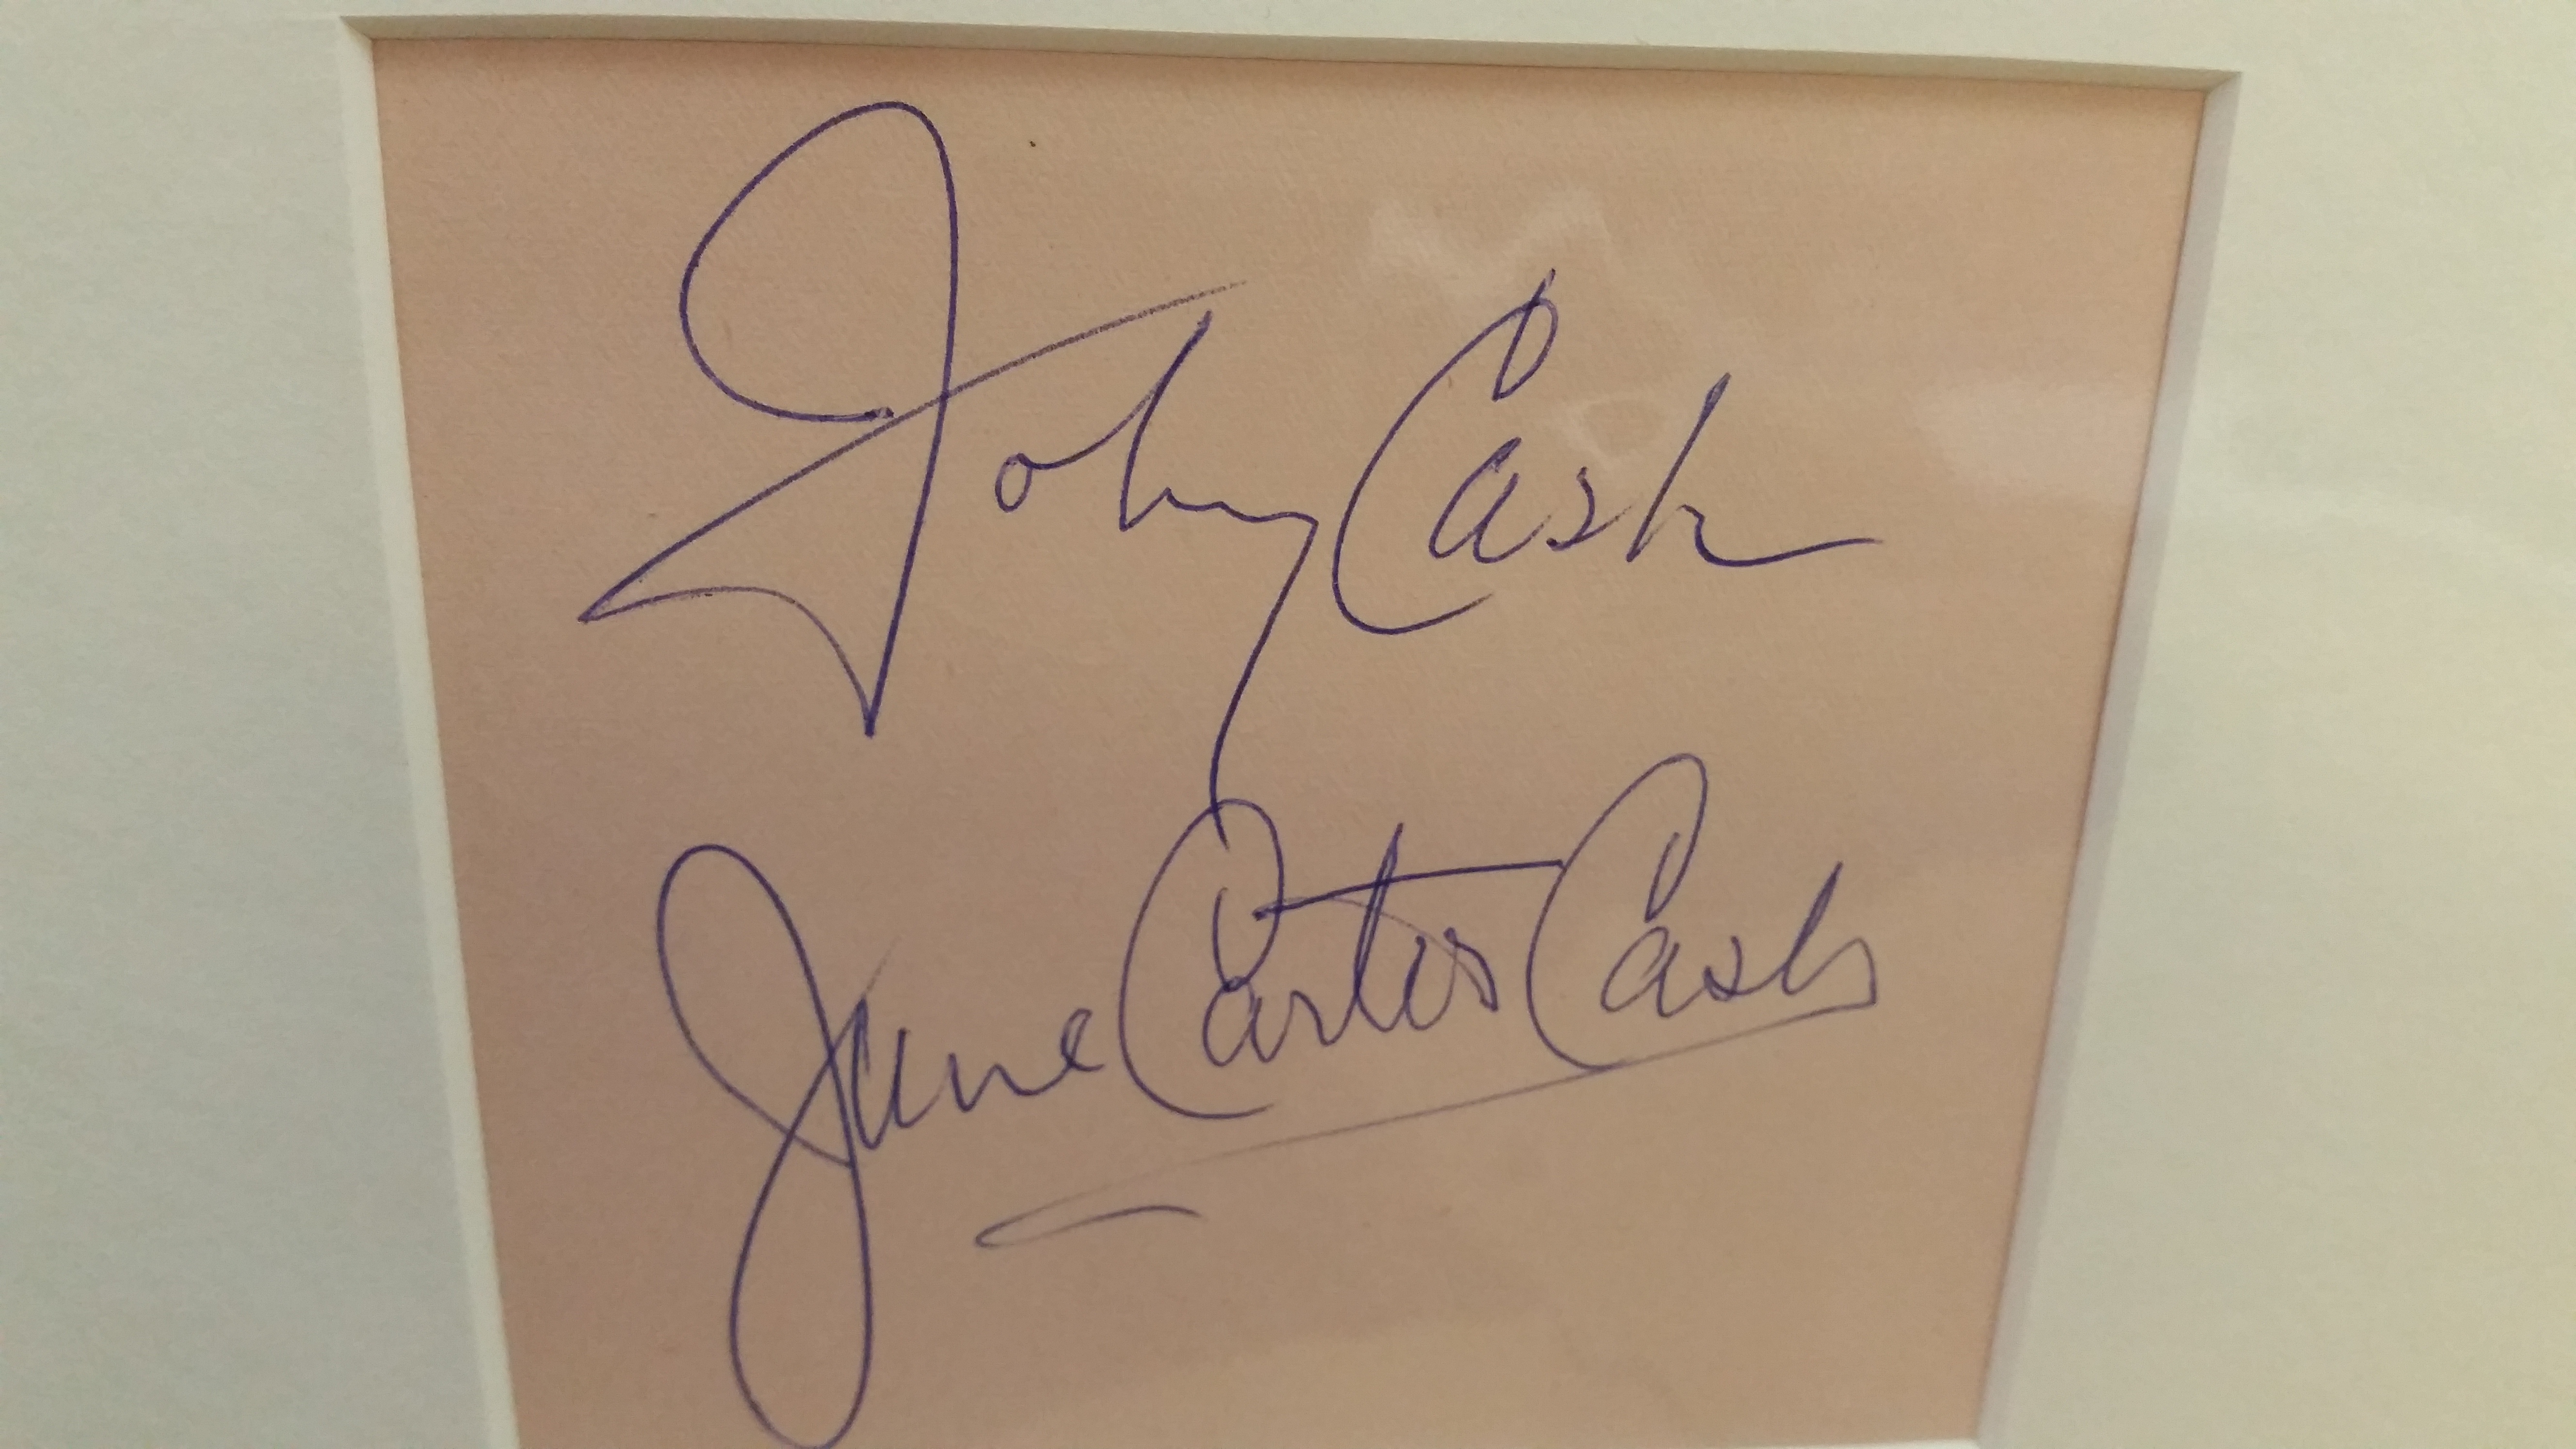 POP MUSIC, signed album page by Johnny Cash & June Carter Cash, 4 x 3.5, overmounted beneath photo - Image 2 of 2